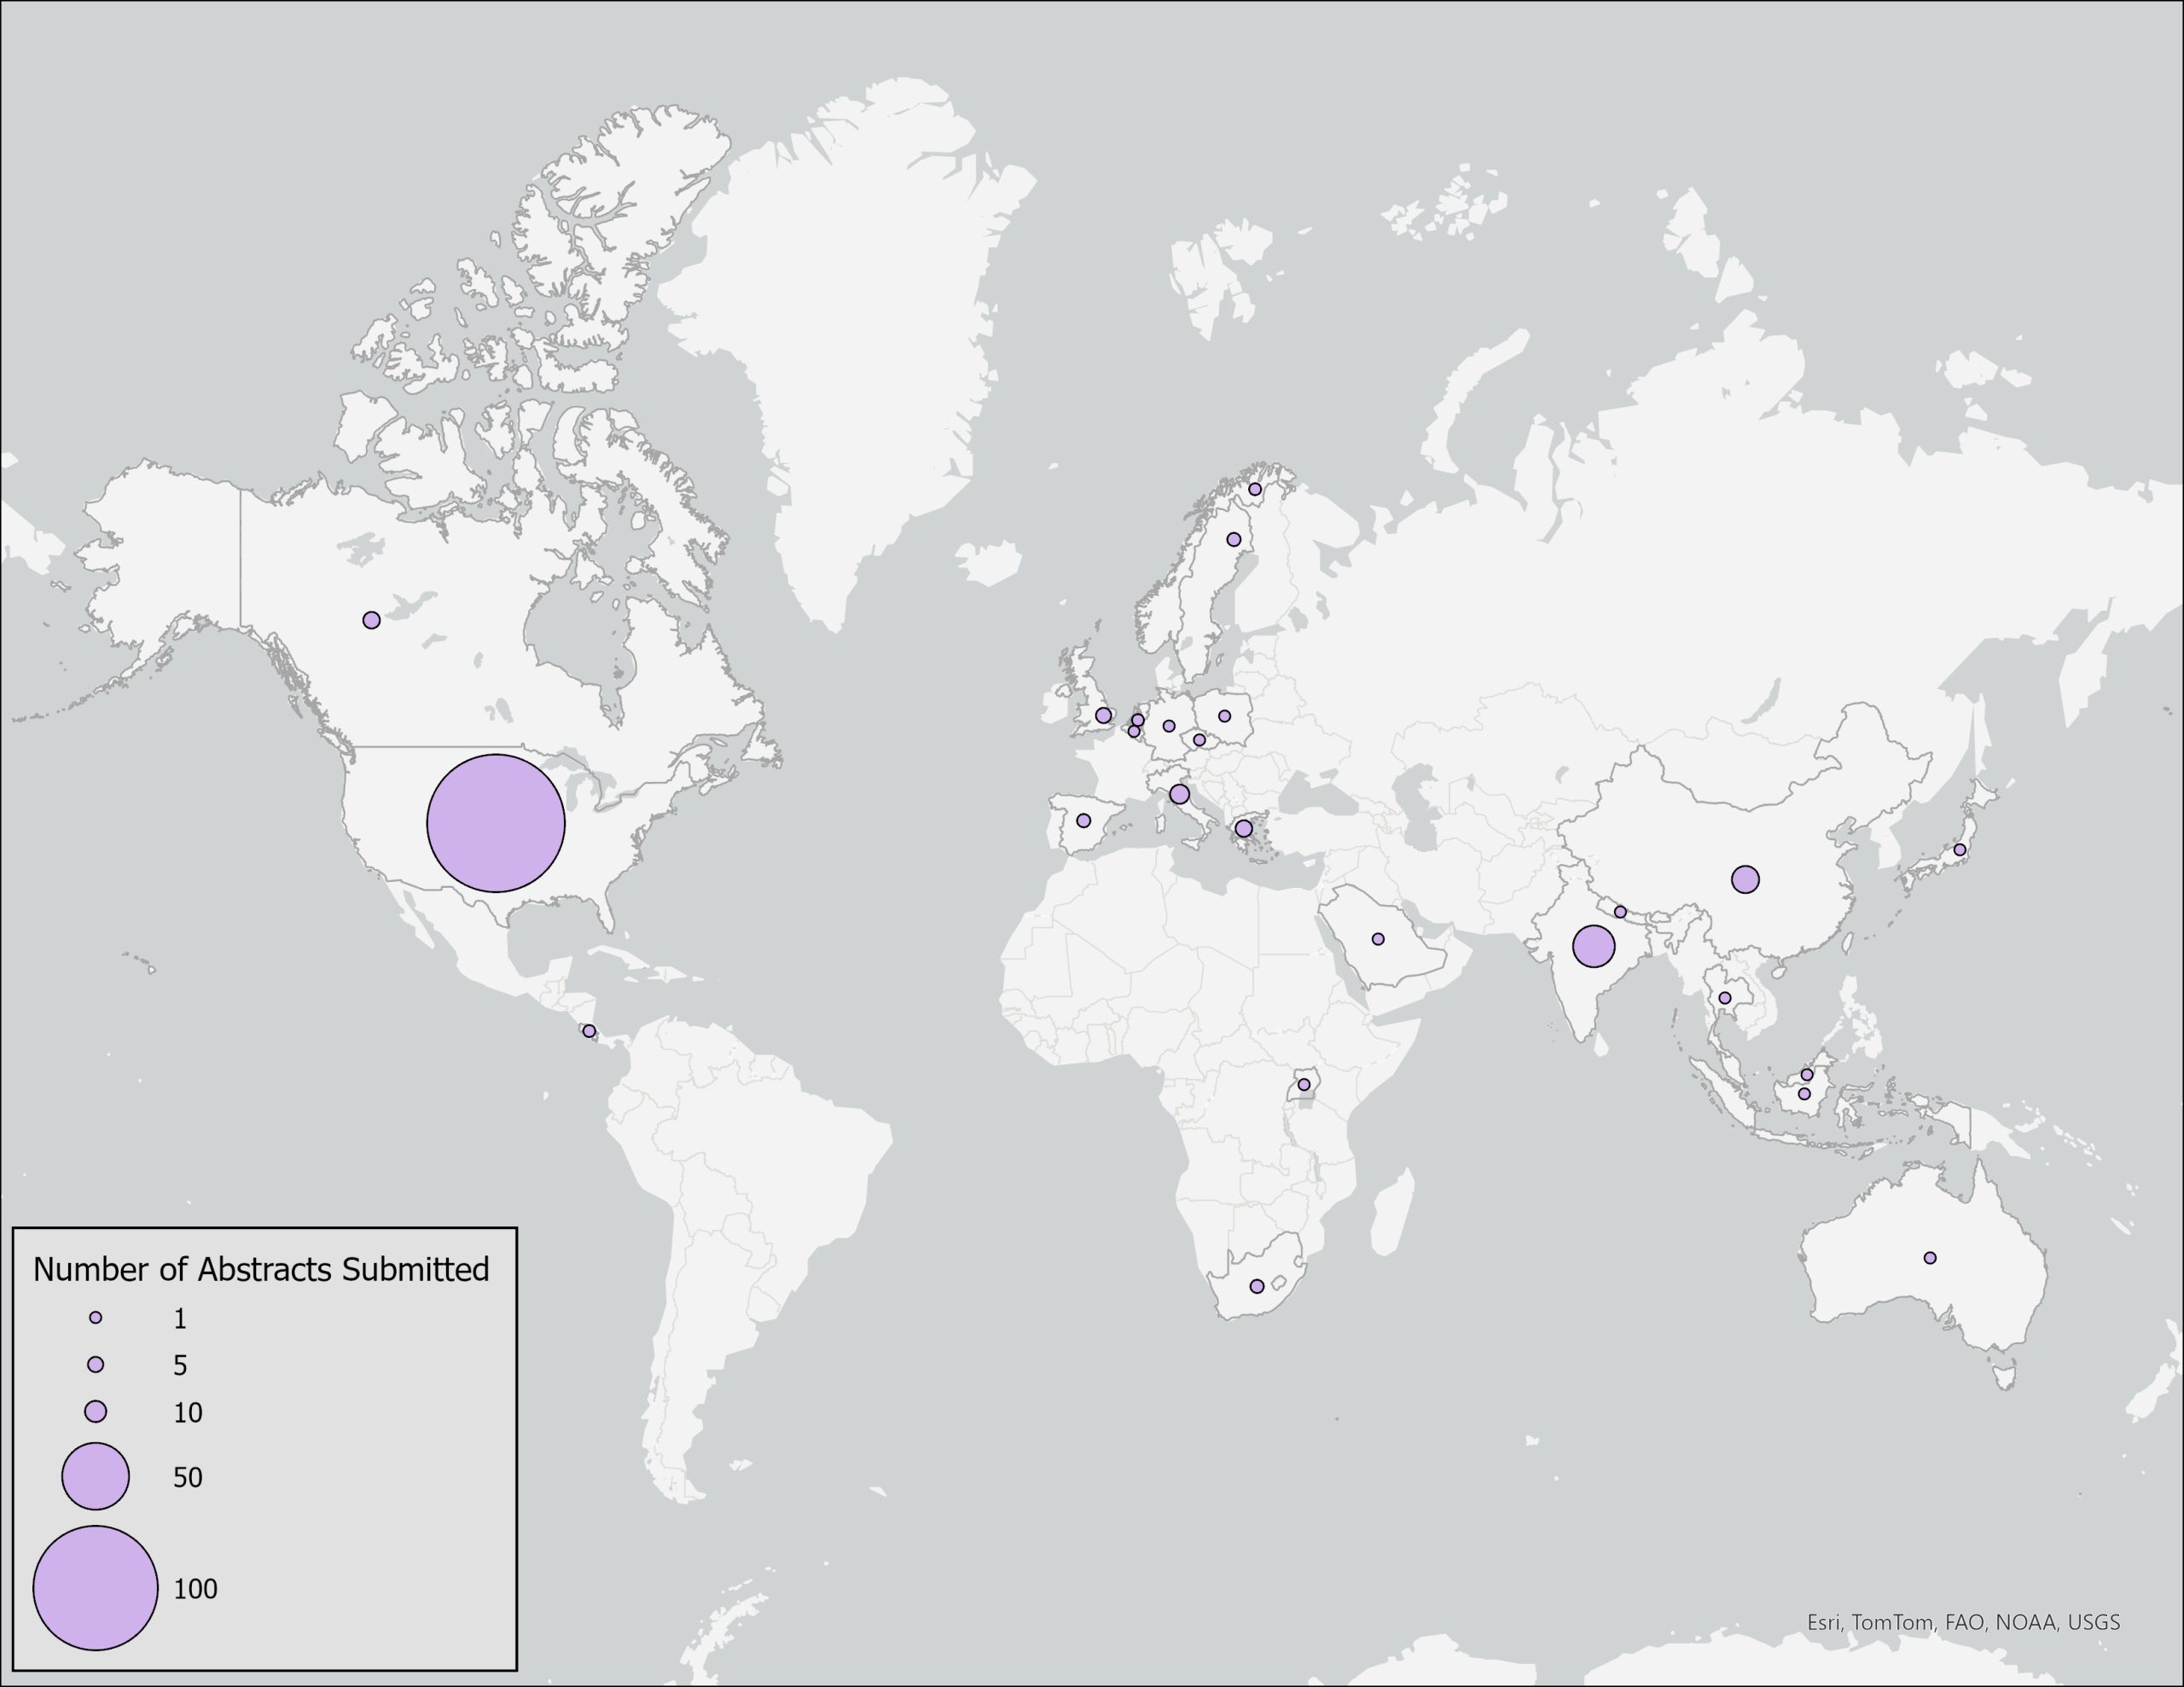 map of where abstracts came from